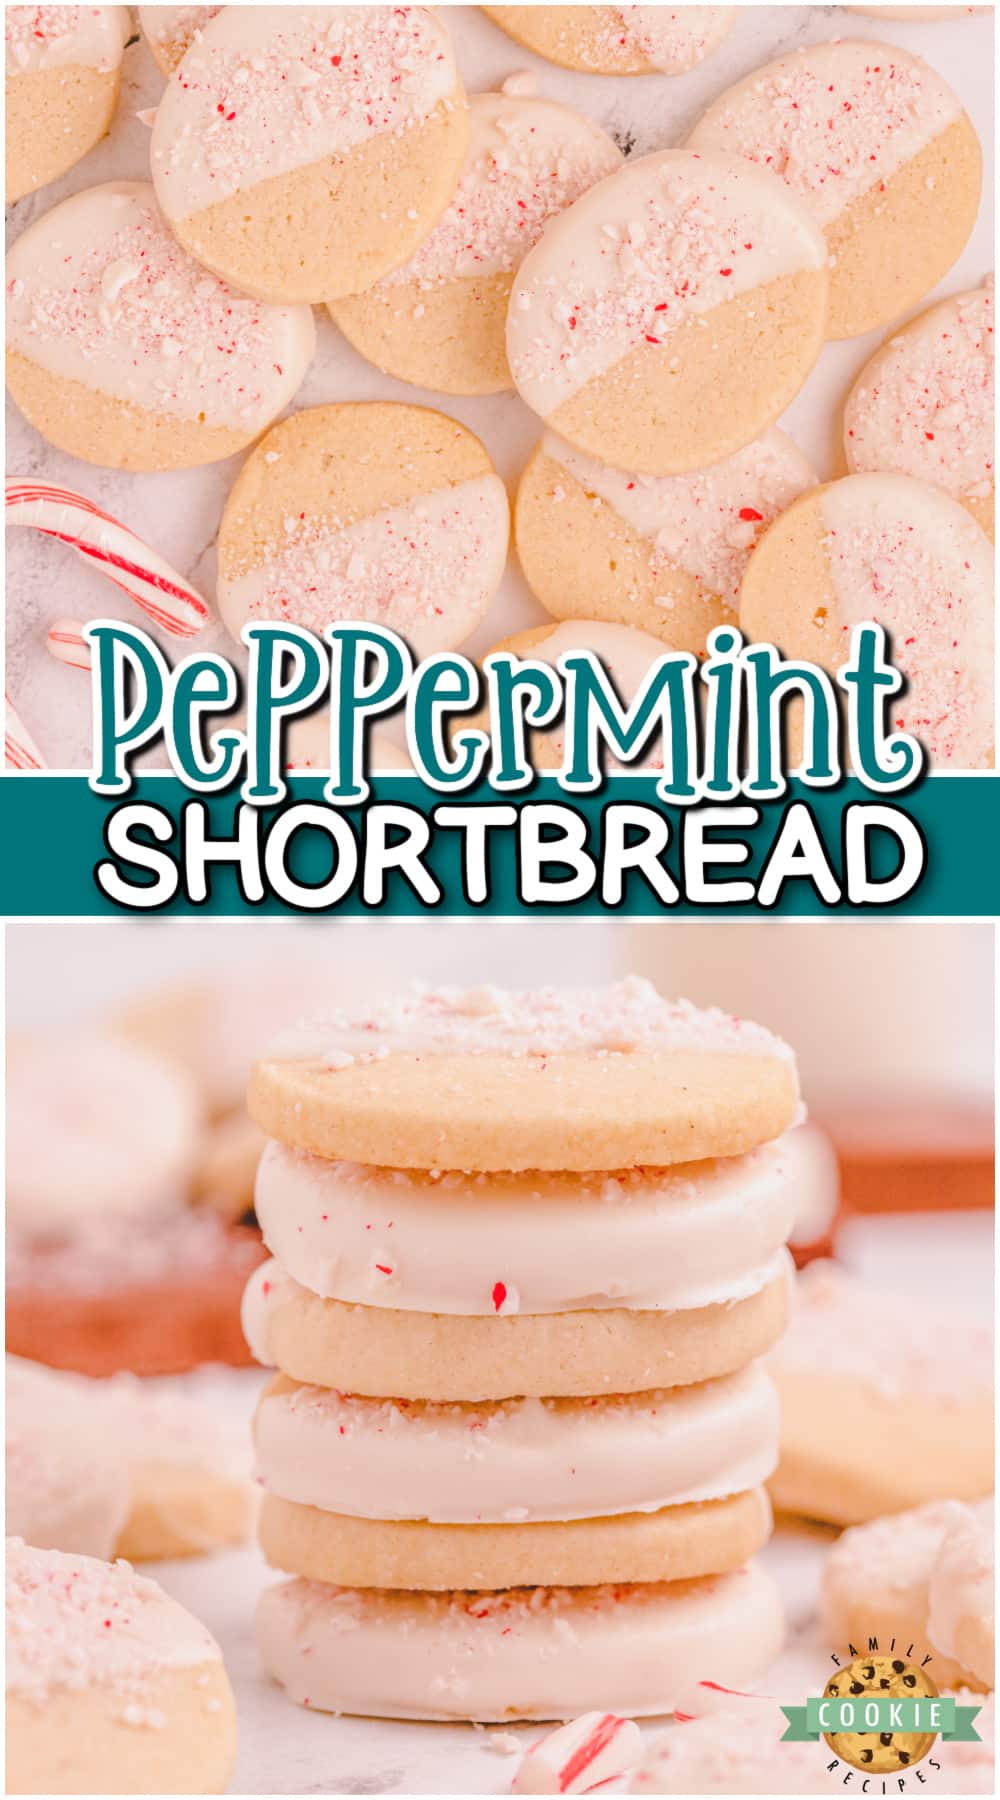 Peppermint shortbread cookies are festive buttery cookies topped with white chocolate & candy cane pieces! Shortbread cookies perfect for Christmas! via @buttergirls